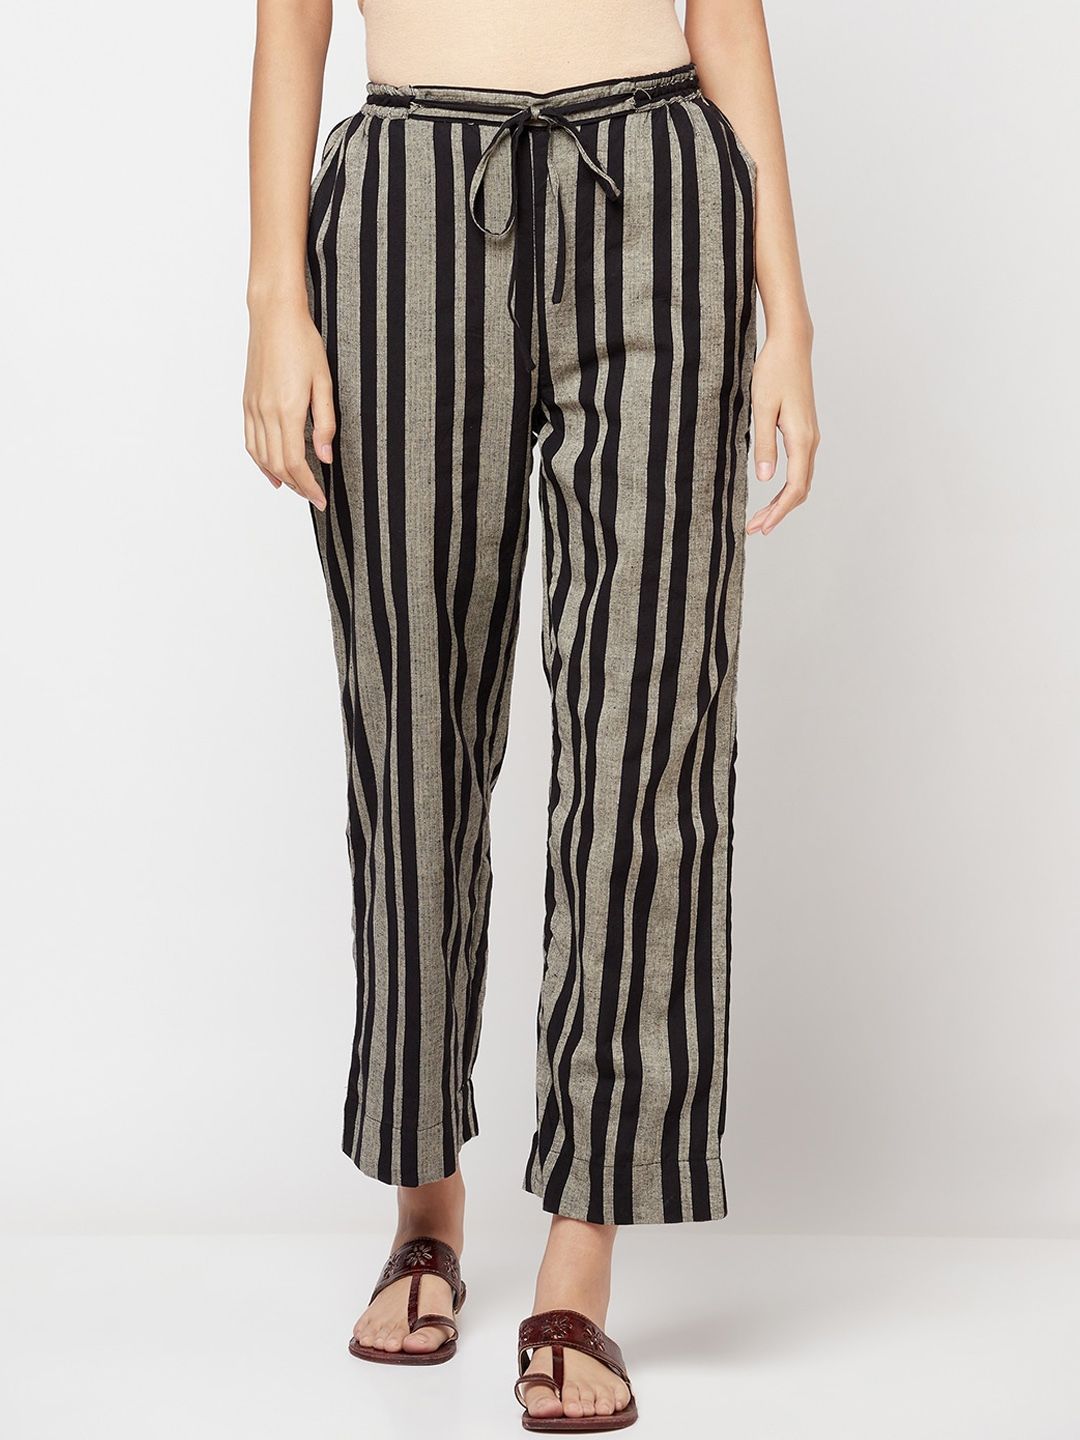 Fabindia Women Black Striped Loose Fit Cotton Trousers Price in India